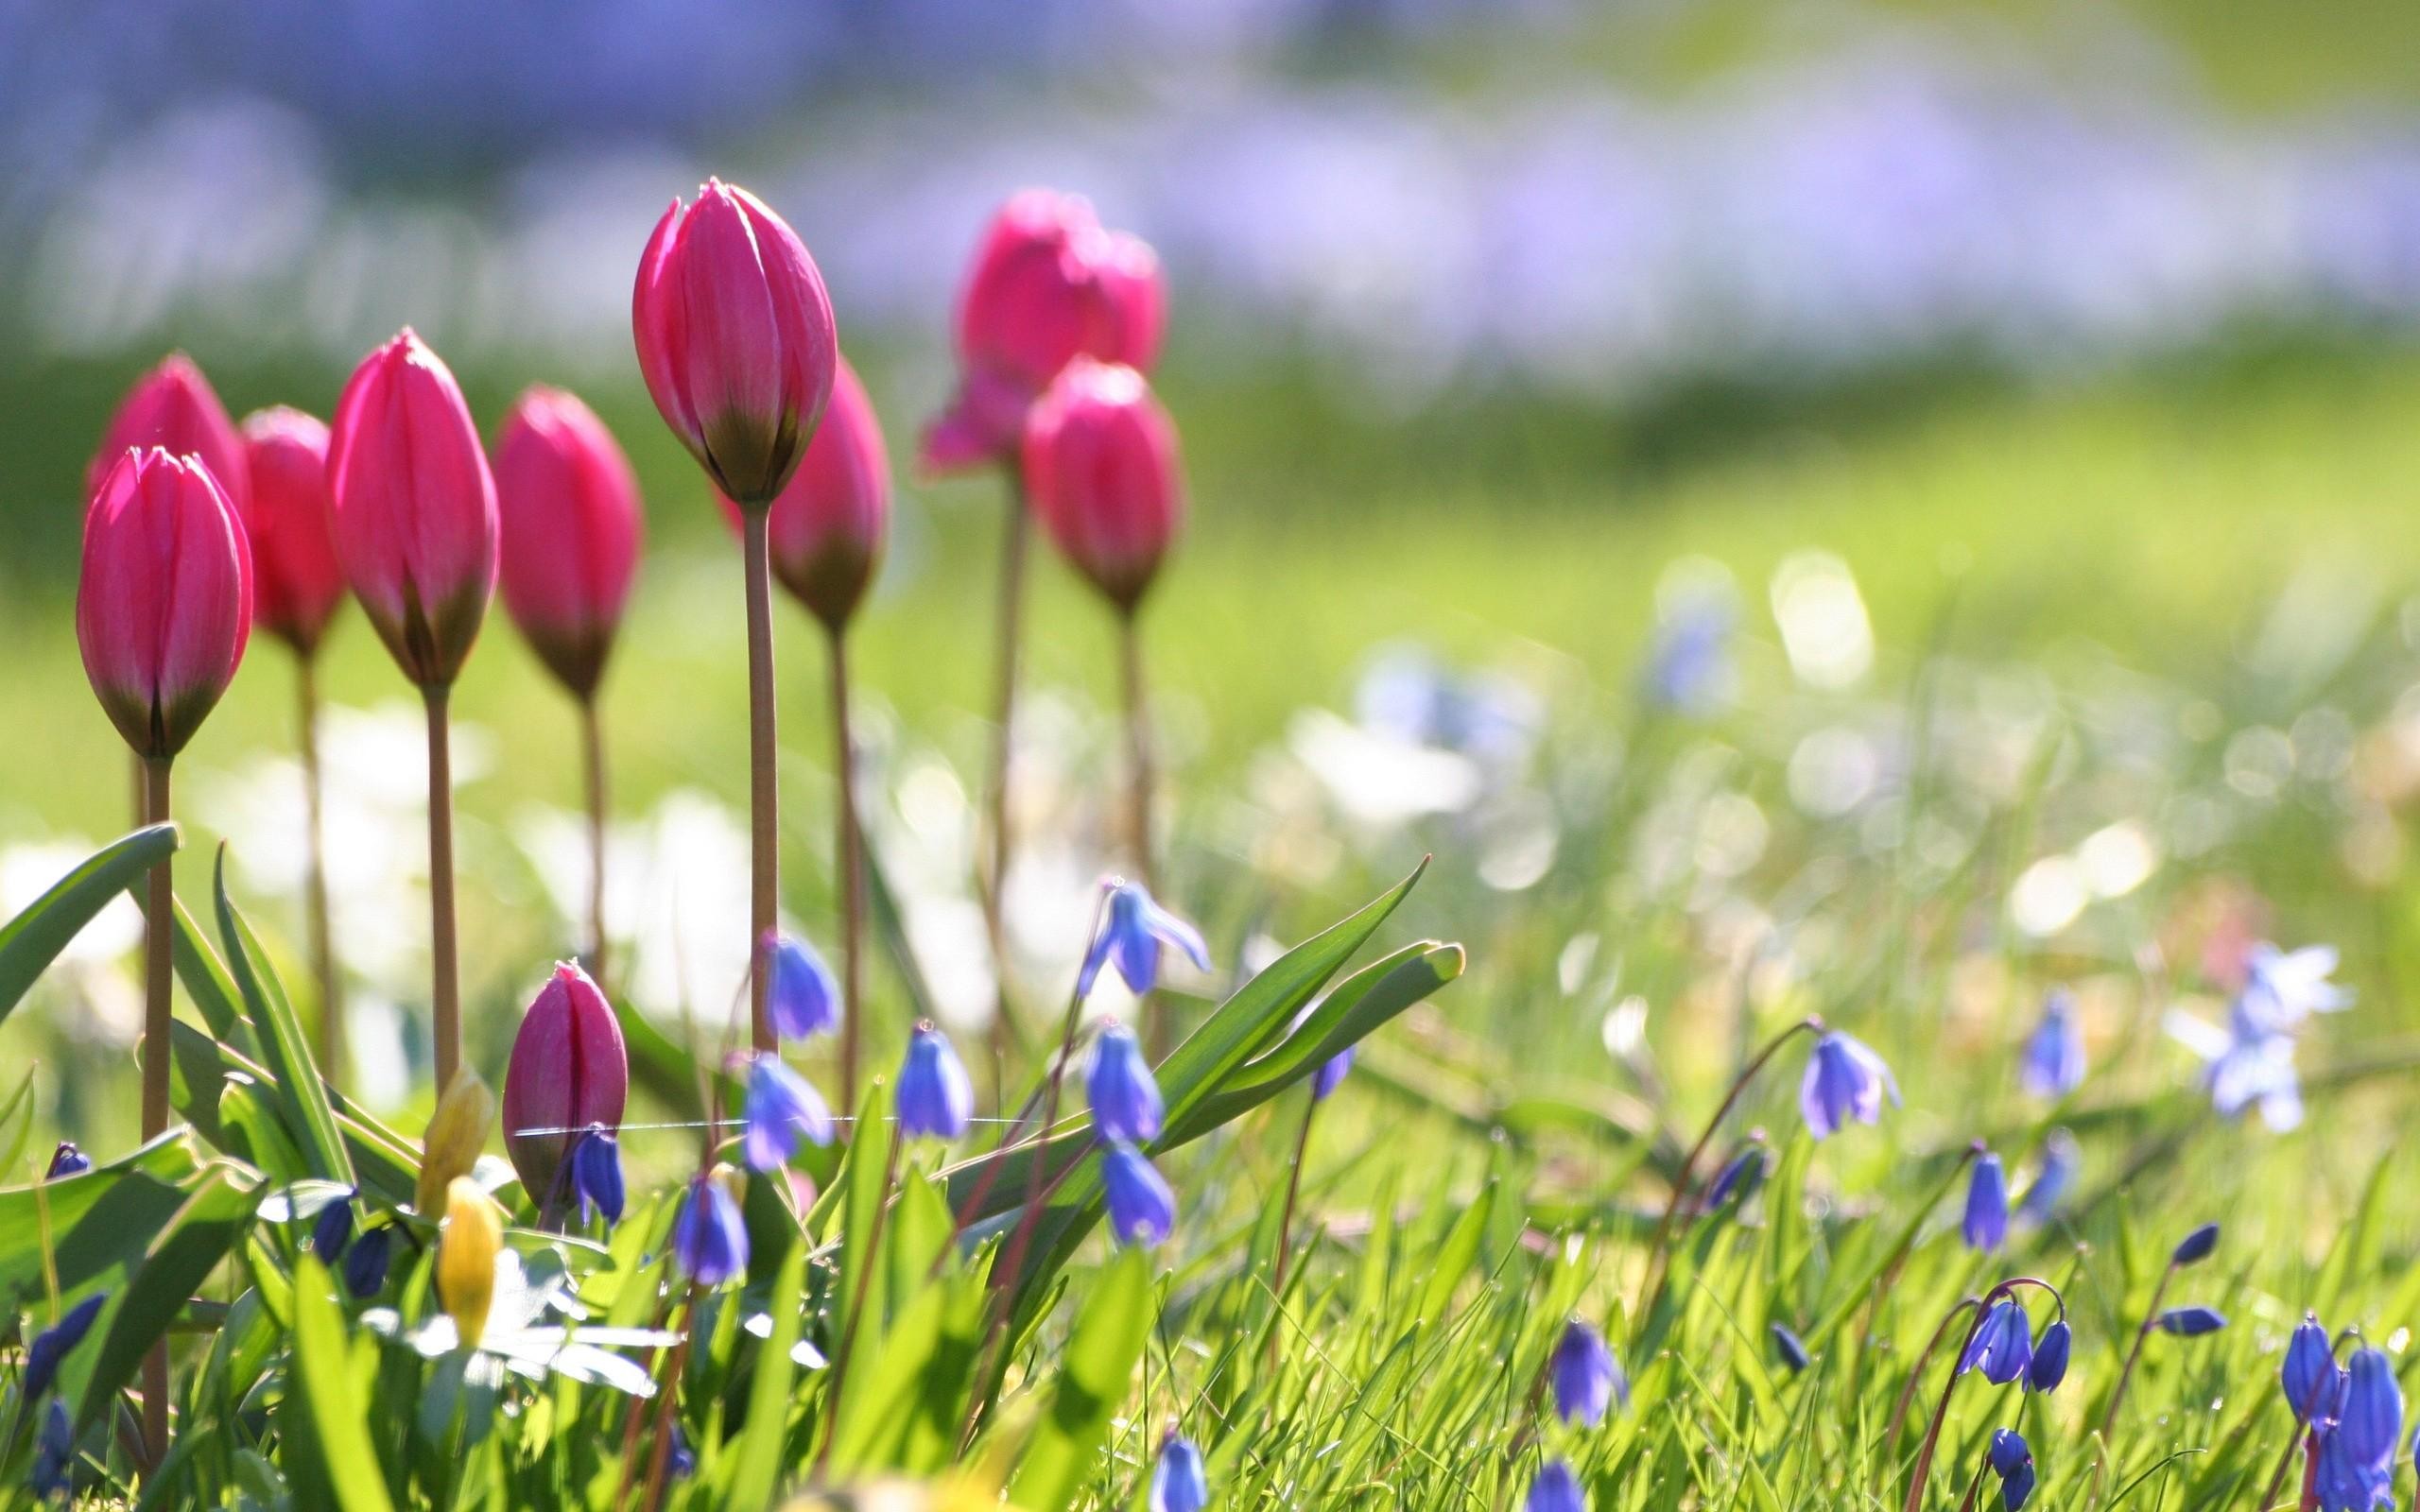 Spring flowers wallpaper nature wallpapers for free download about